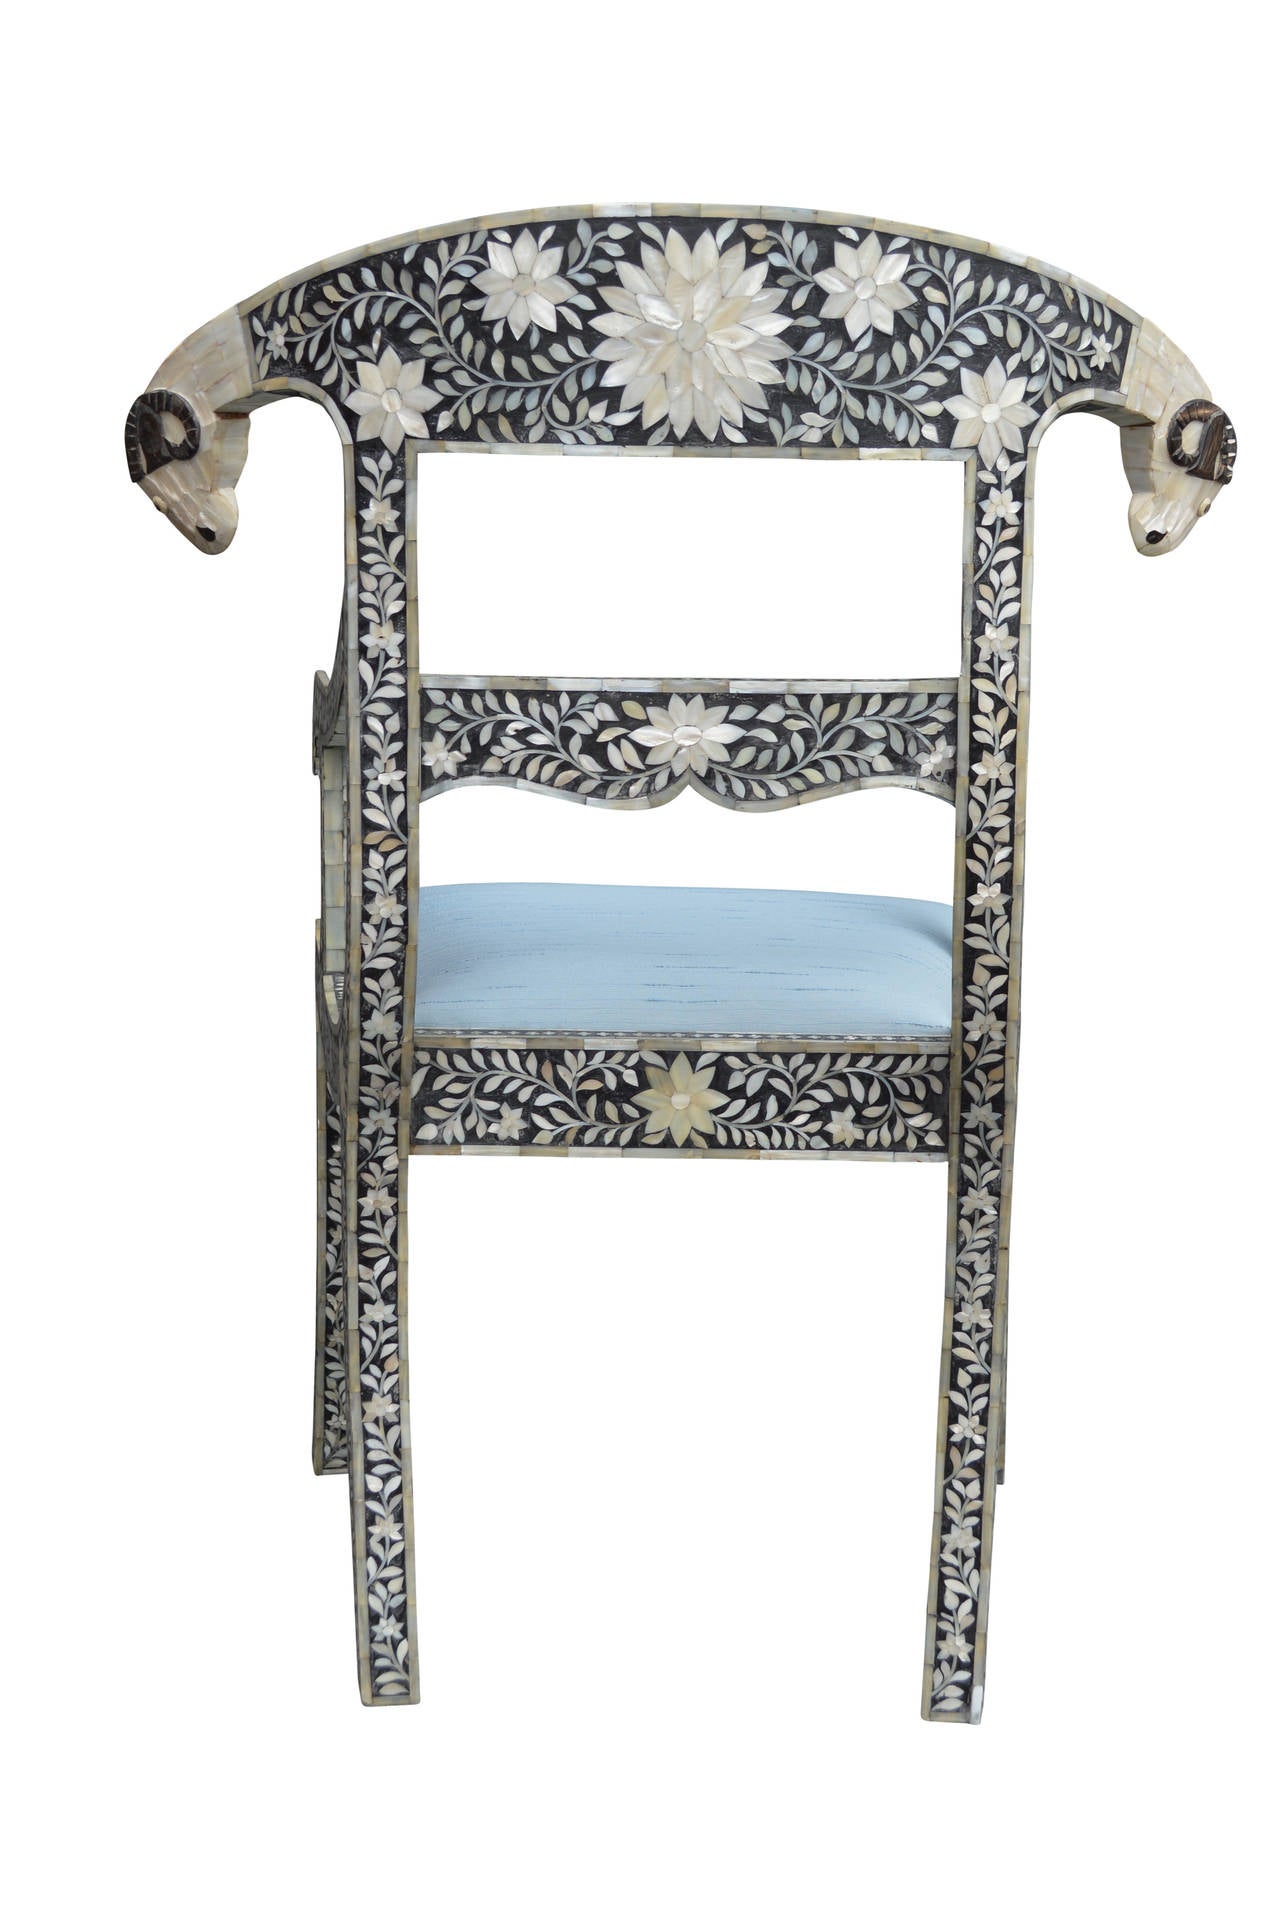 Mother-of-pearl inlaid armchair with ram's head.
Newly upholstered with Azure blue fabric.